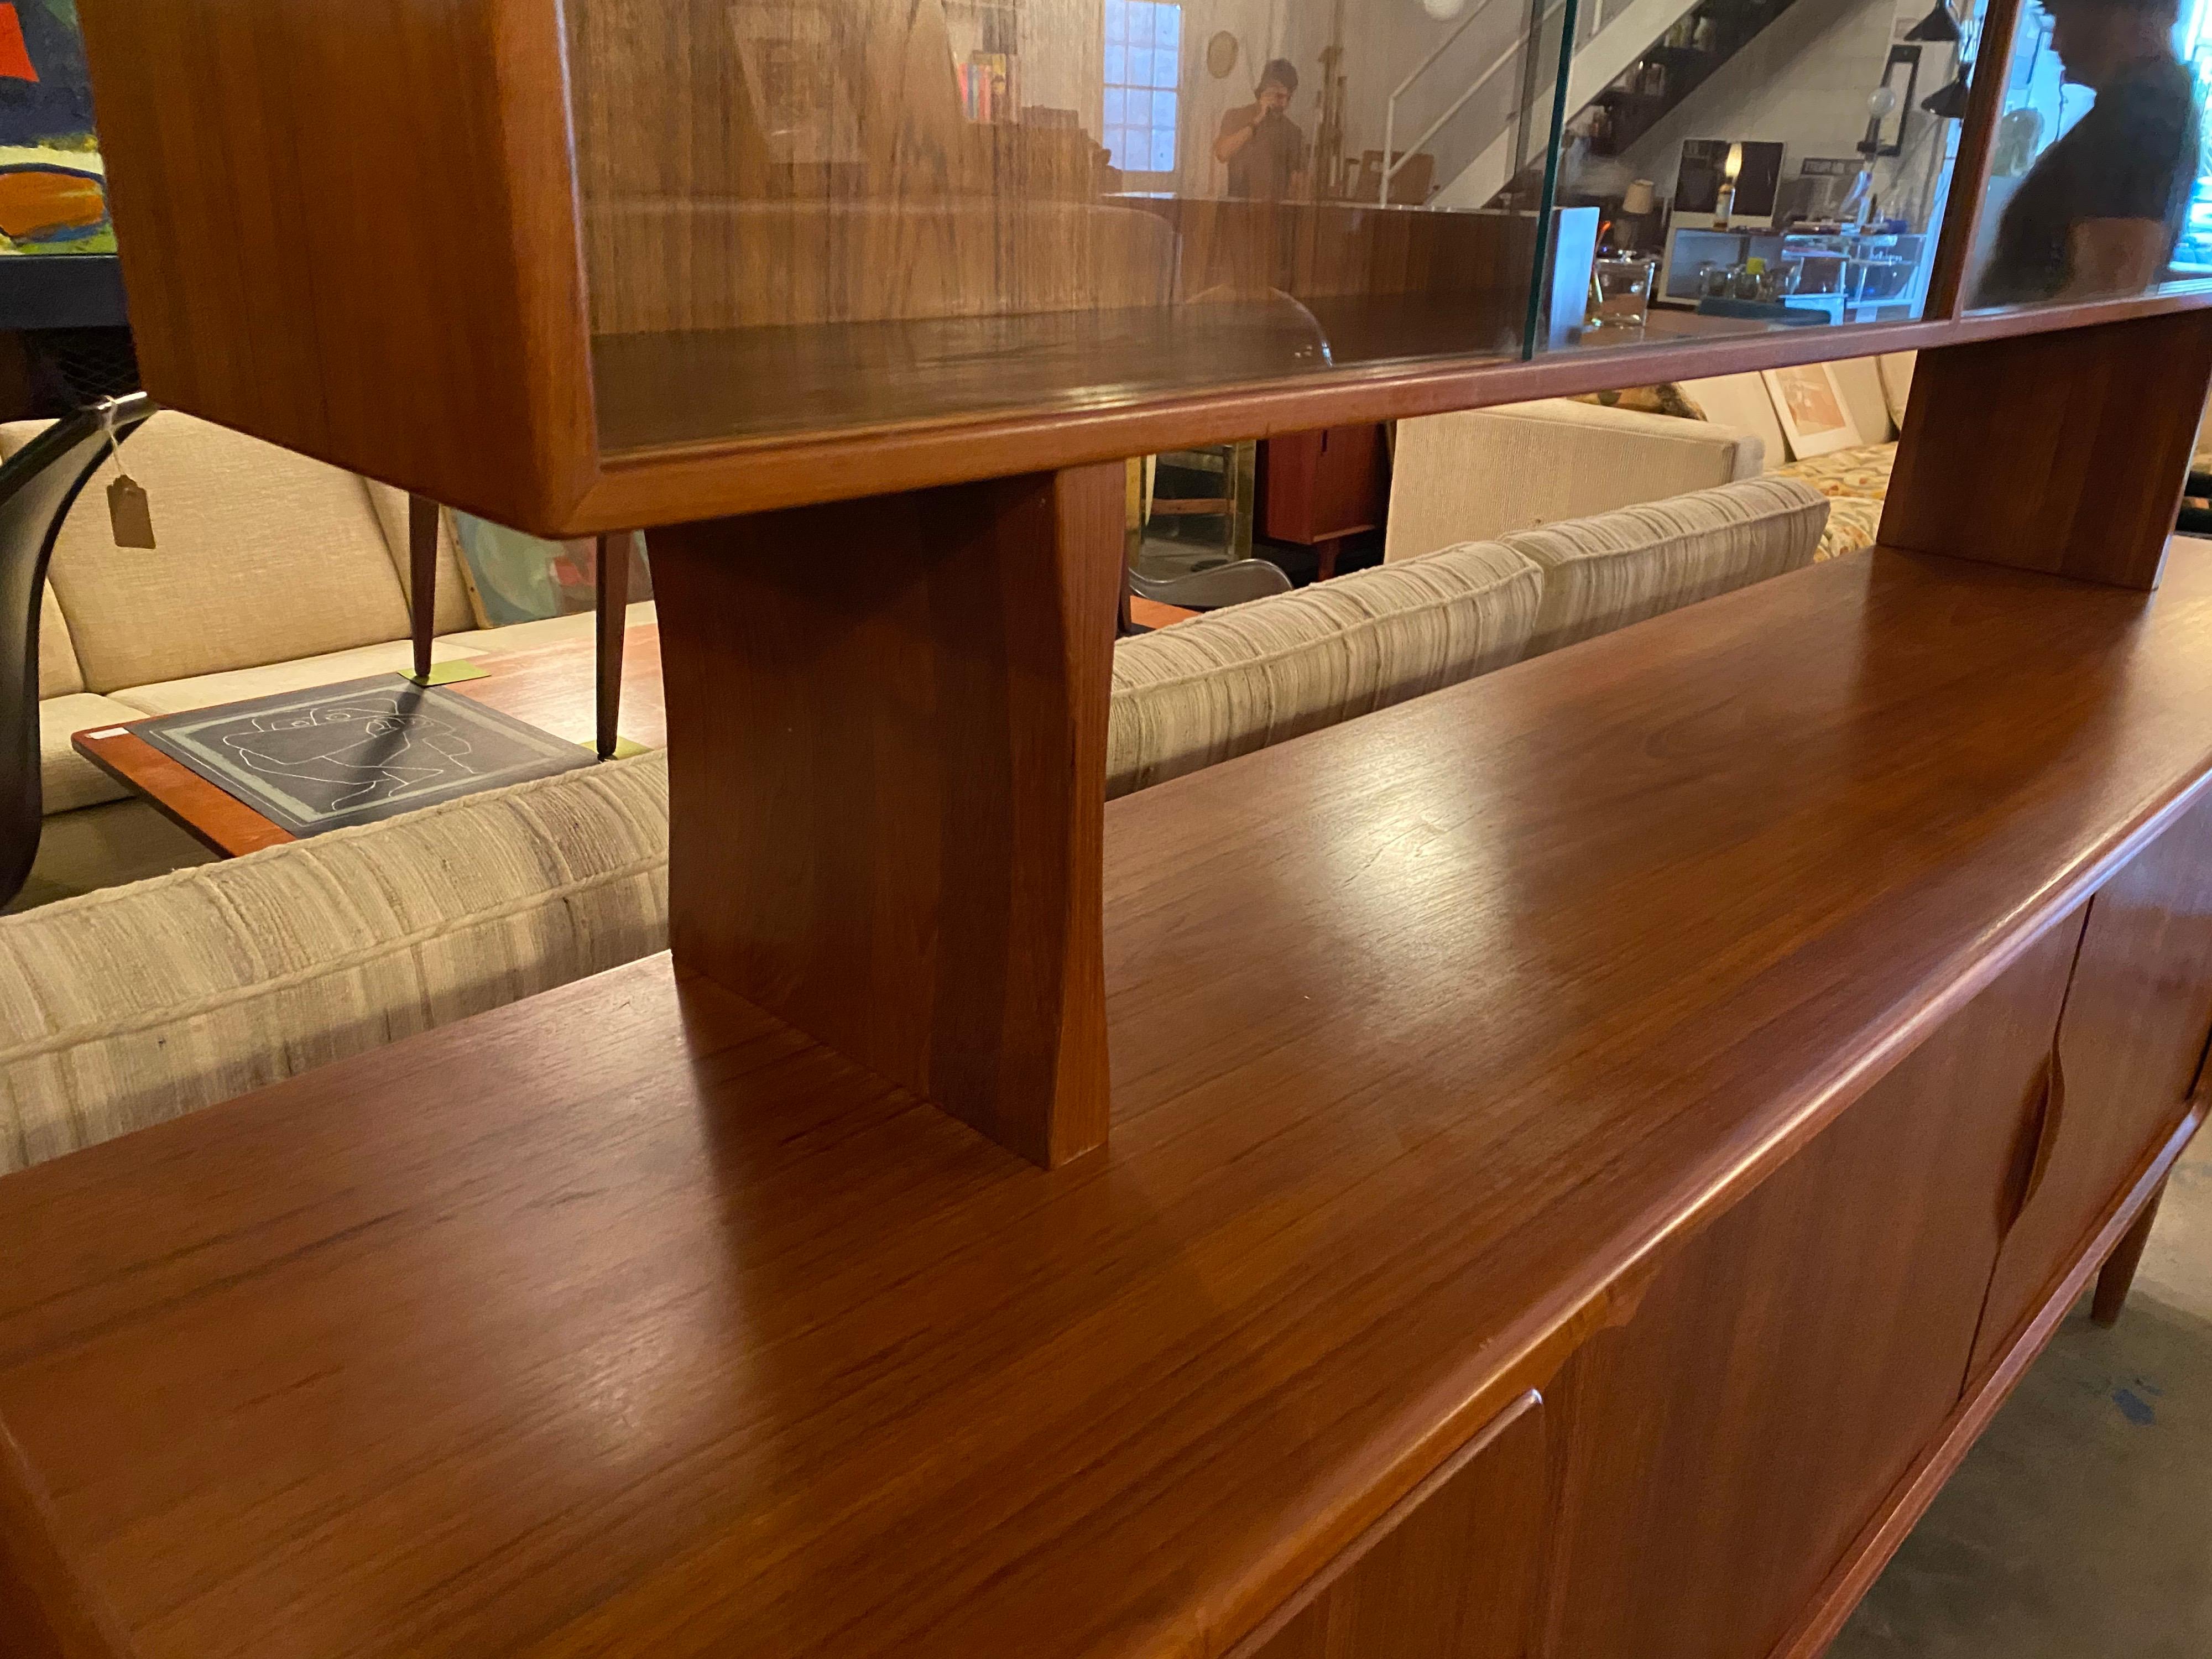 Beautiful vintage Danish modern teak credenza with removable hutch is designed by Johannes Andersen. With smooth lines, finished back, and sculpted handles the tambour doors open up to plenty of shelving as well as pull out drawers lined with felt,